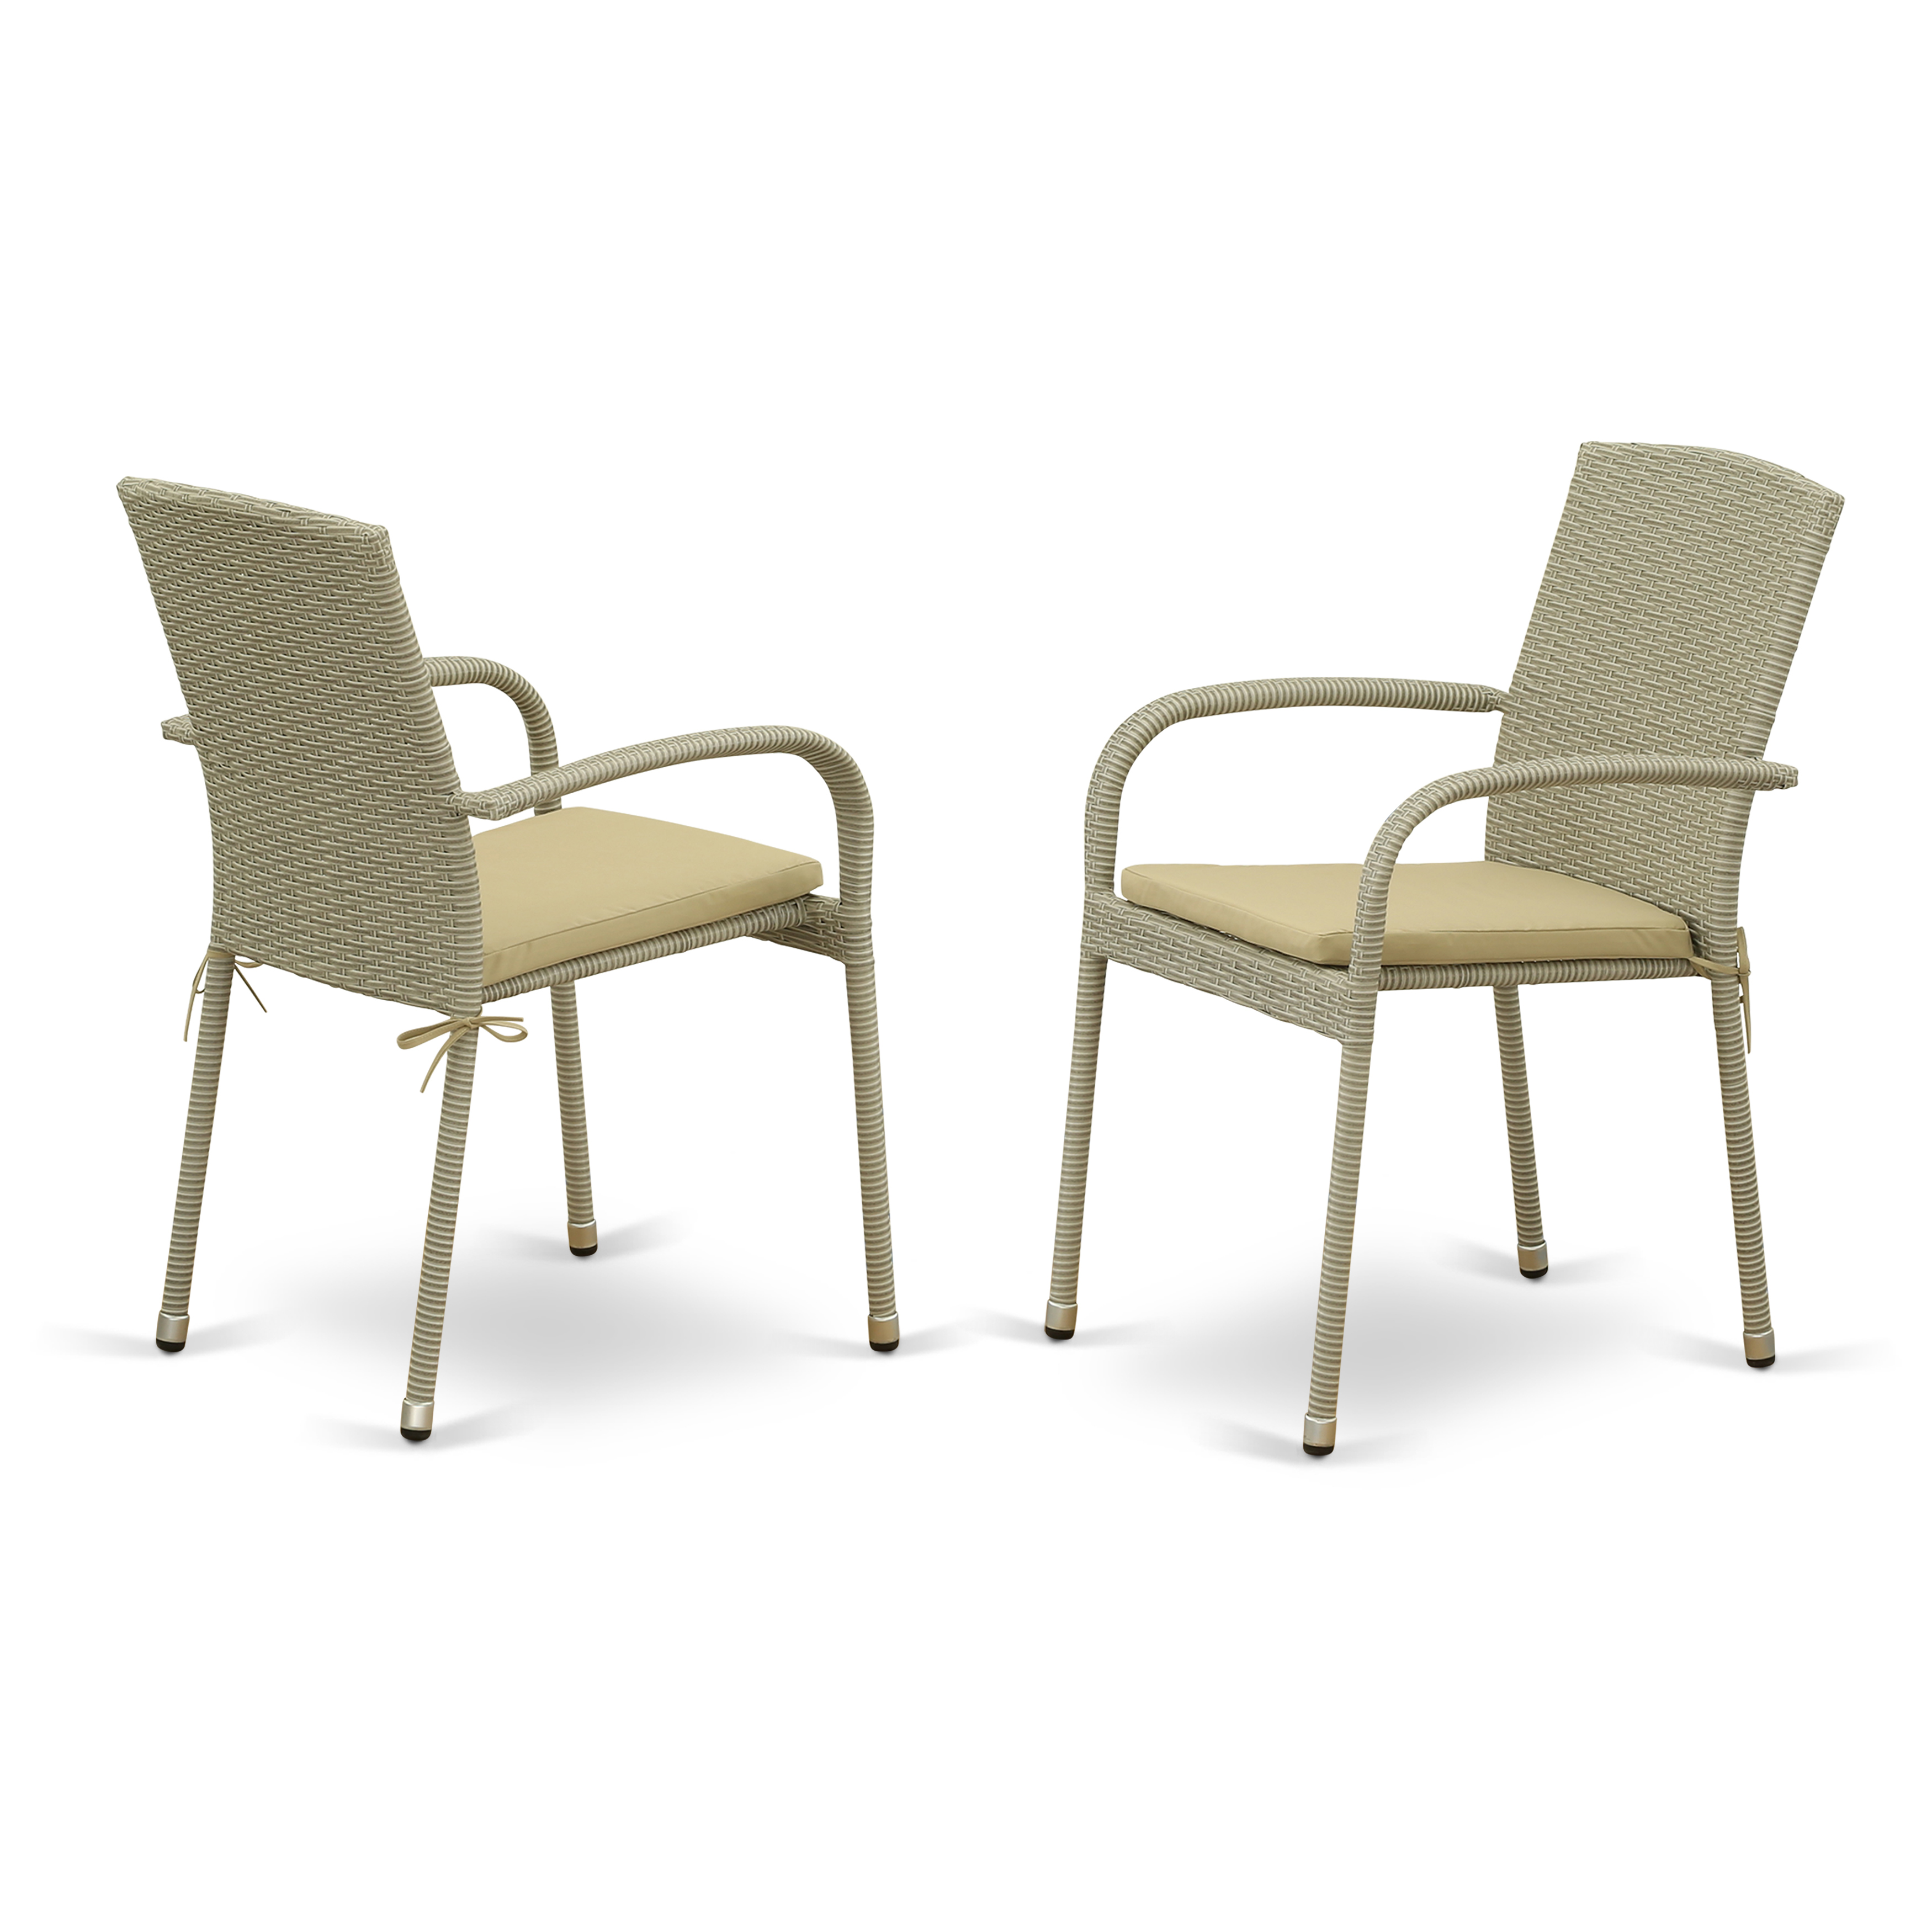 East West Furniture Outdoor Dining Chair - Wicker - Set of 2 - with Cushion - Natural and Beige - image 2 of 7